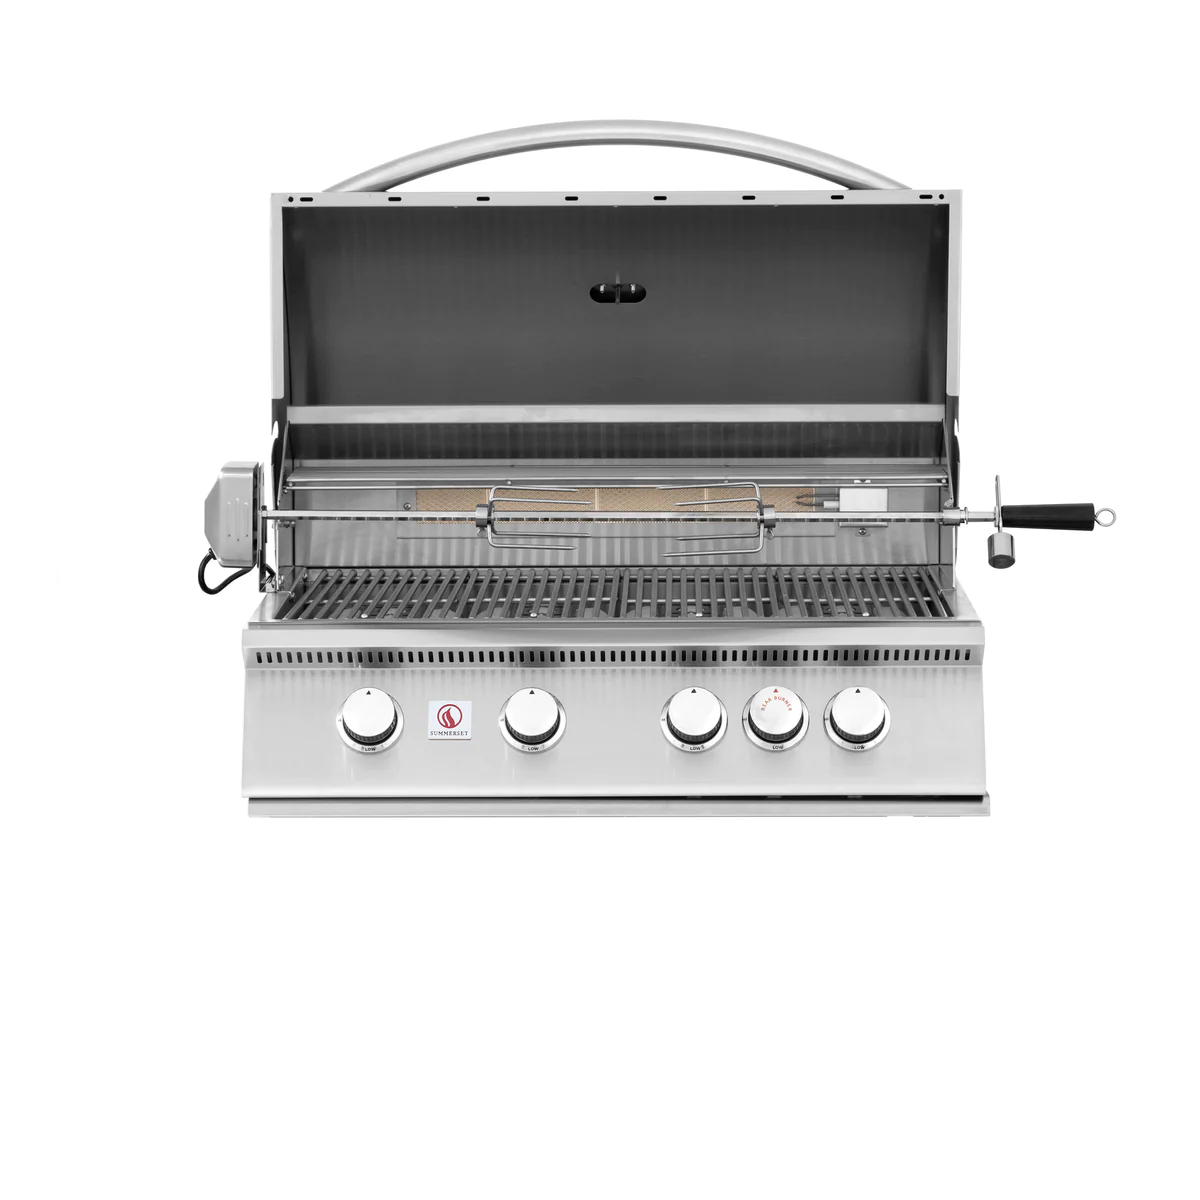 Summerset Sizzler Series 32 Inch Built-In Gas Grill - SIZ32-NG